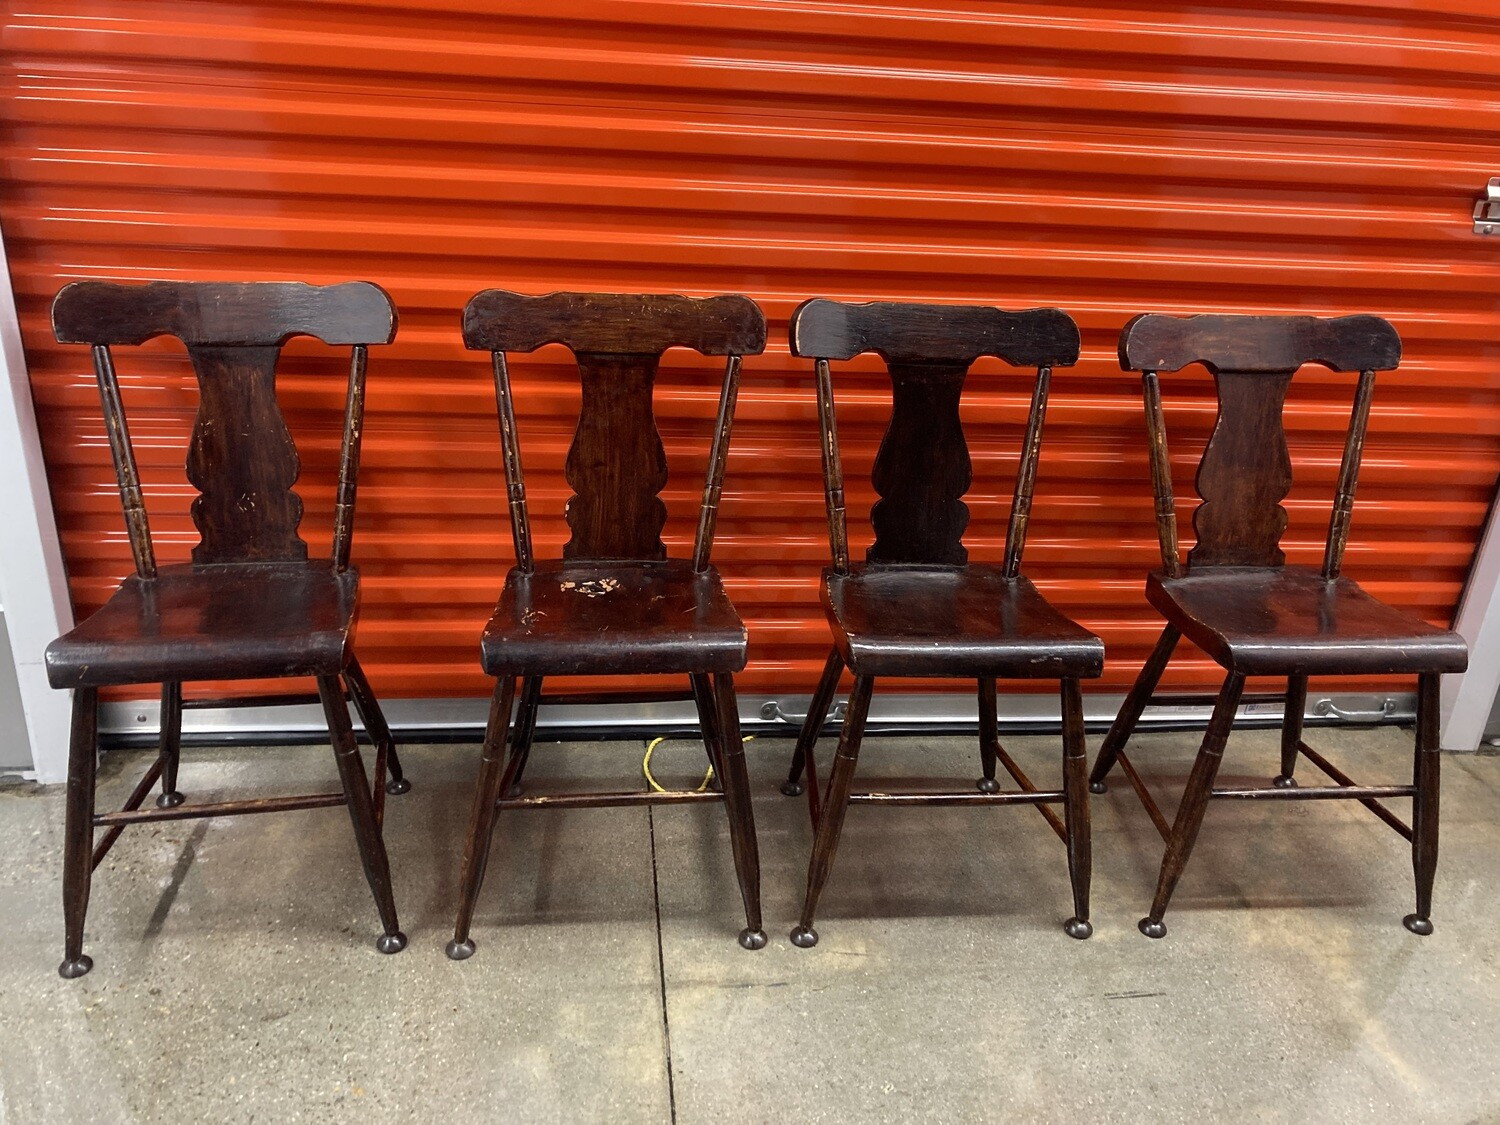 Set of 4 Vintage "Fiddle back" Chairs #1115